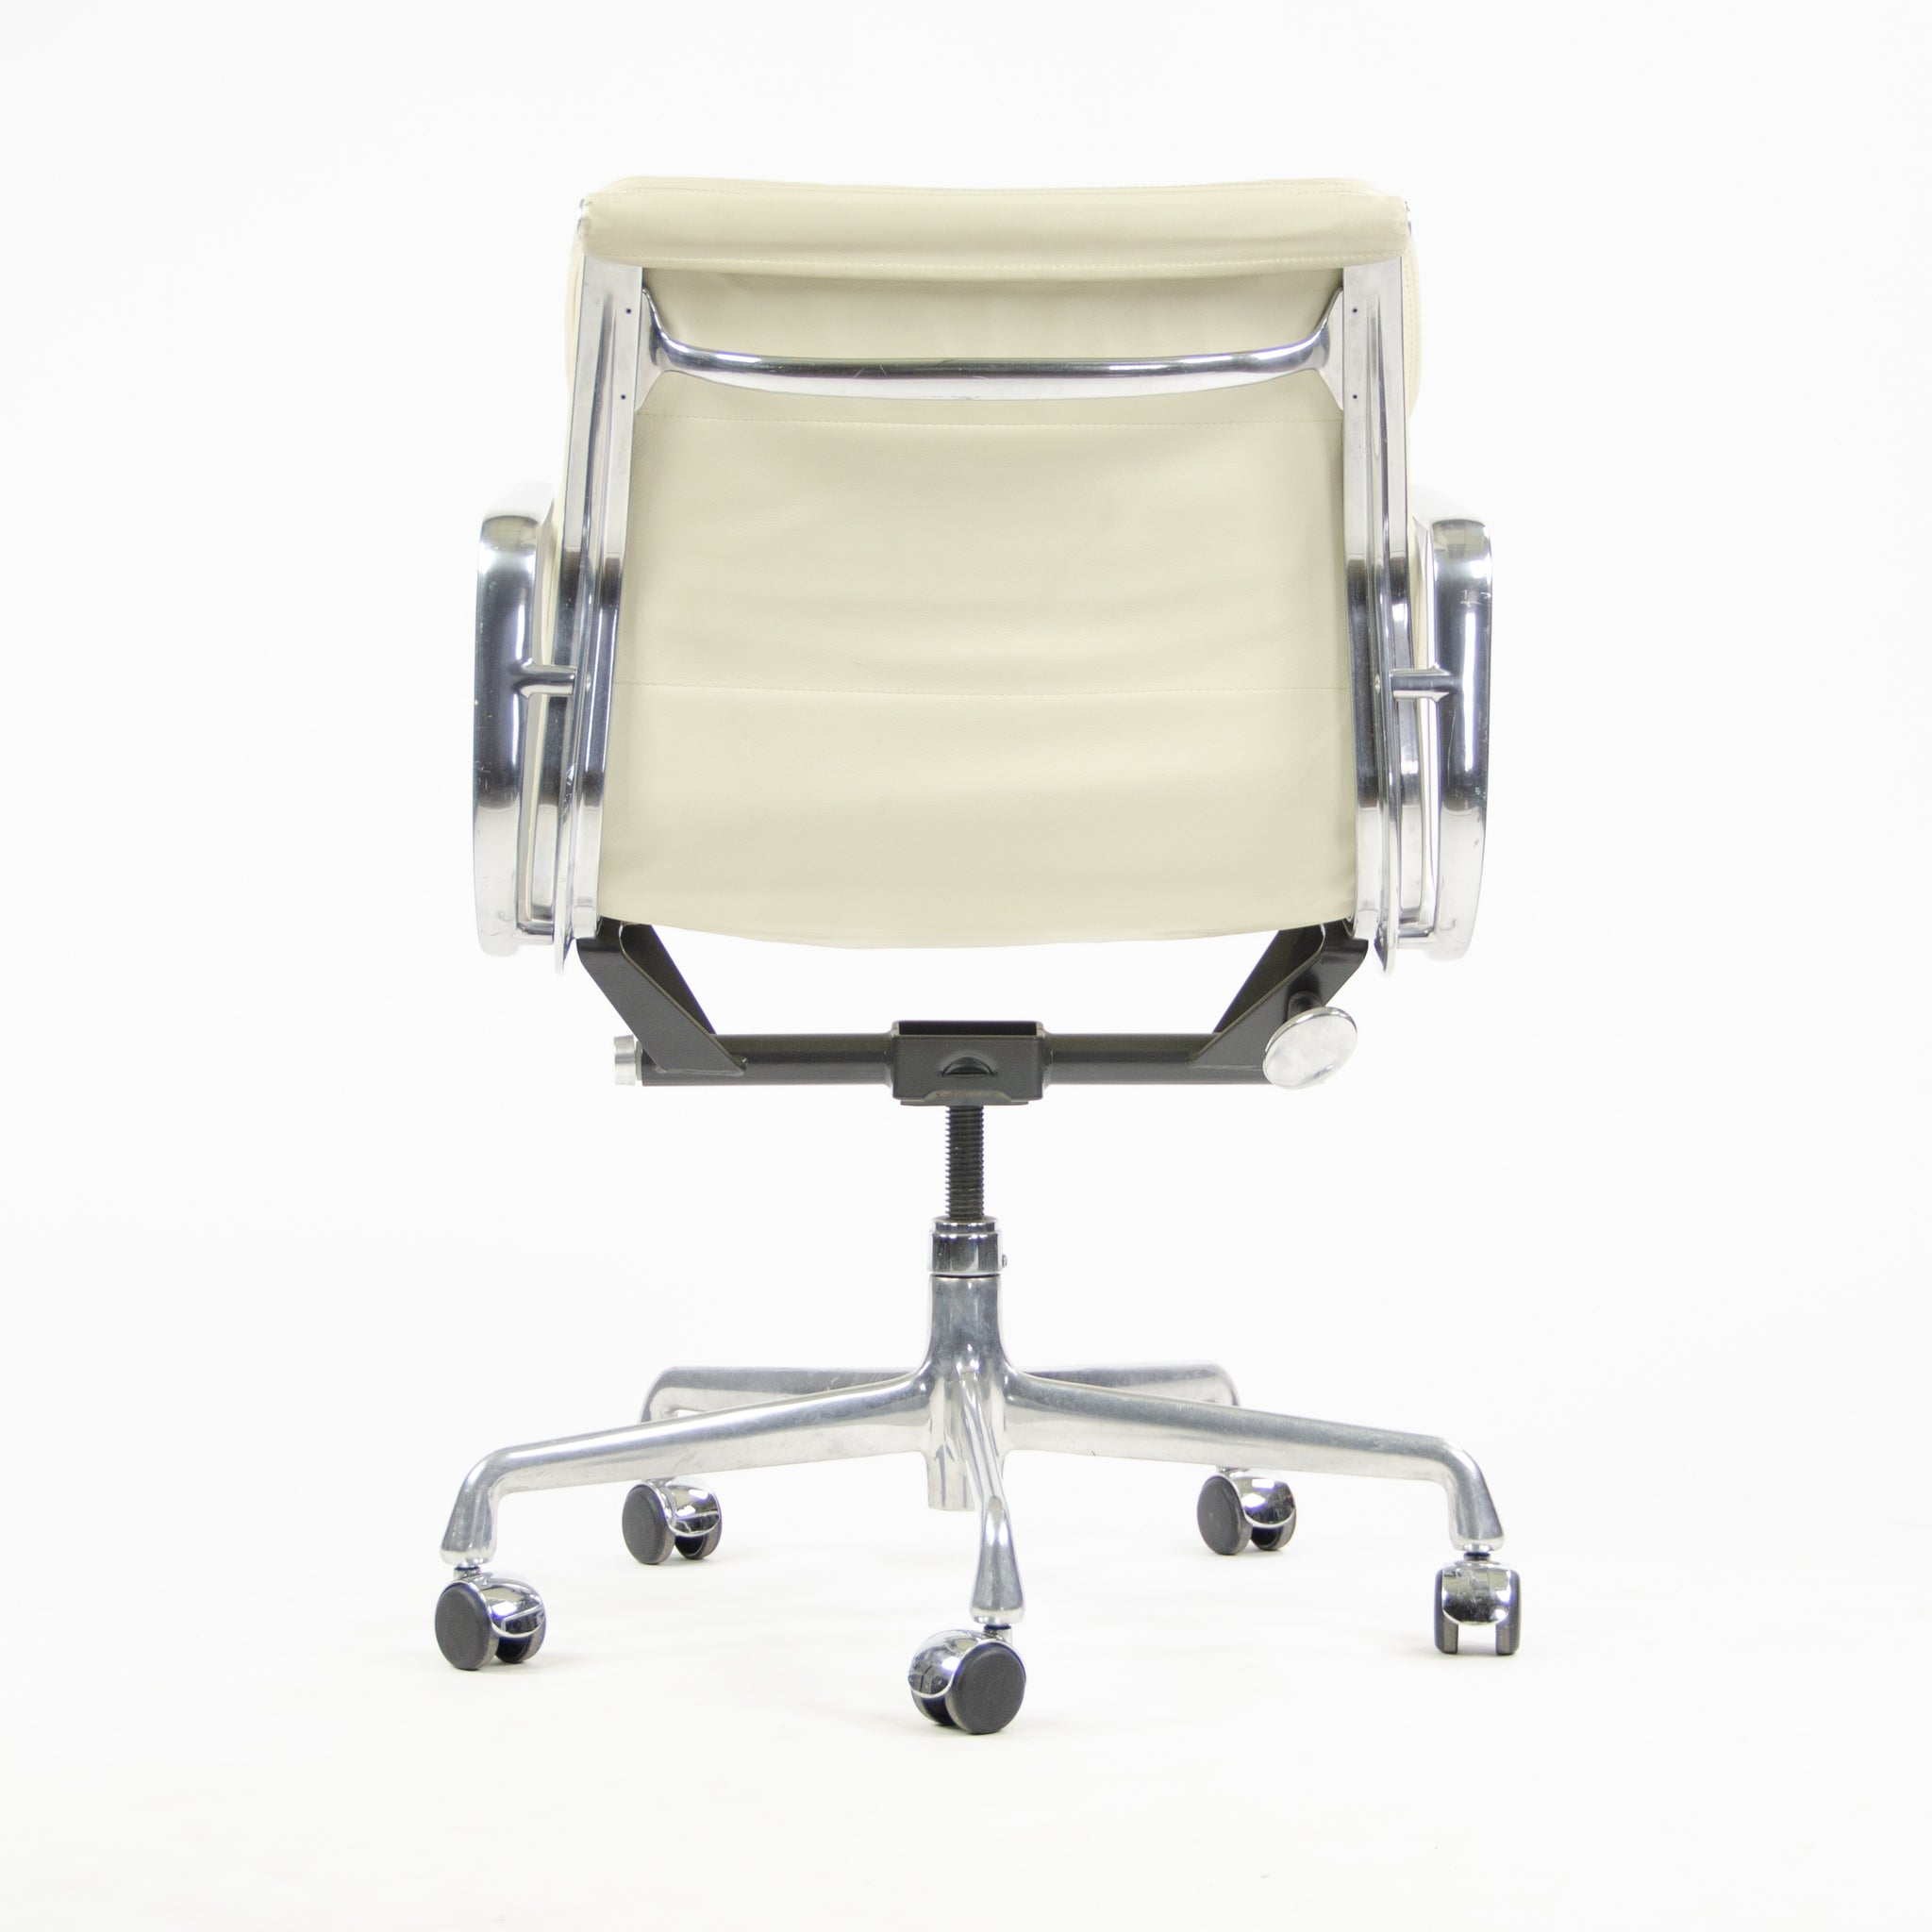 SOLD Herman Miller Eames Soft Pad Aluminum Group Chair Ivory Leather 2000's